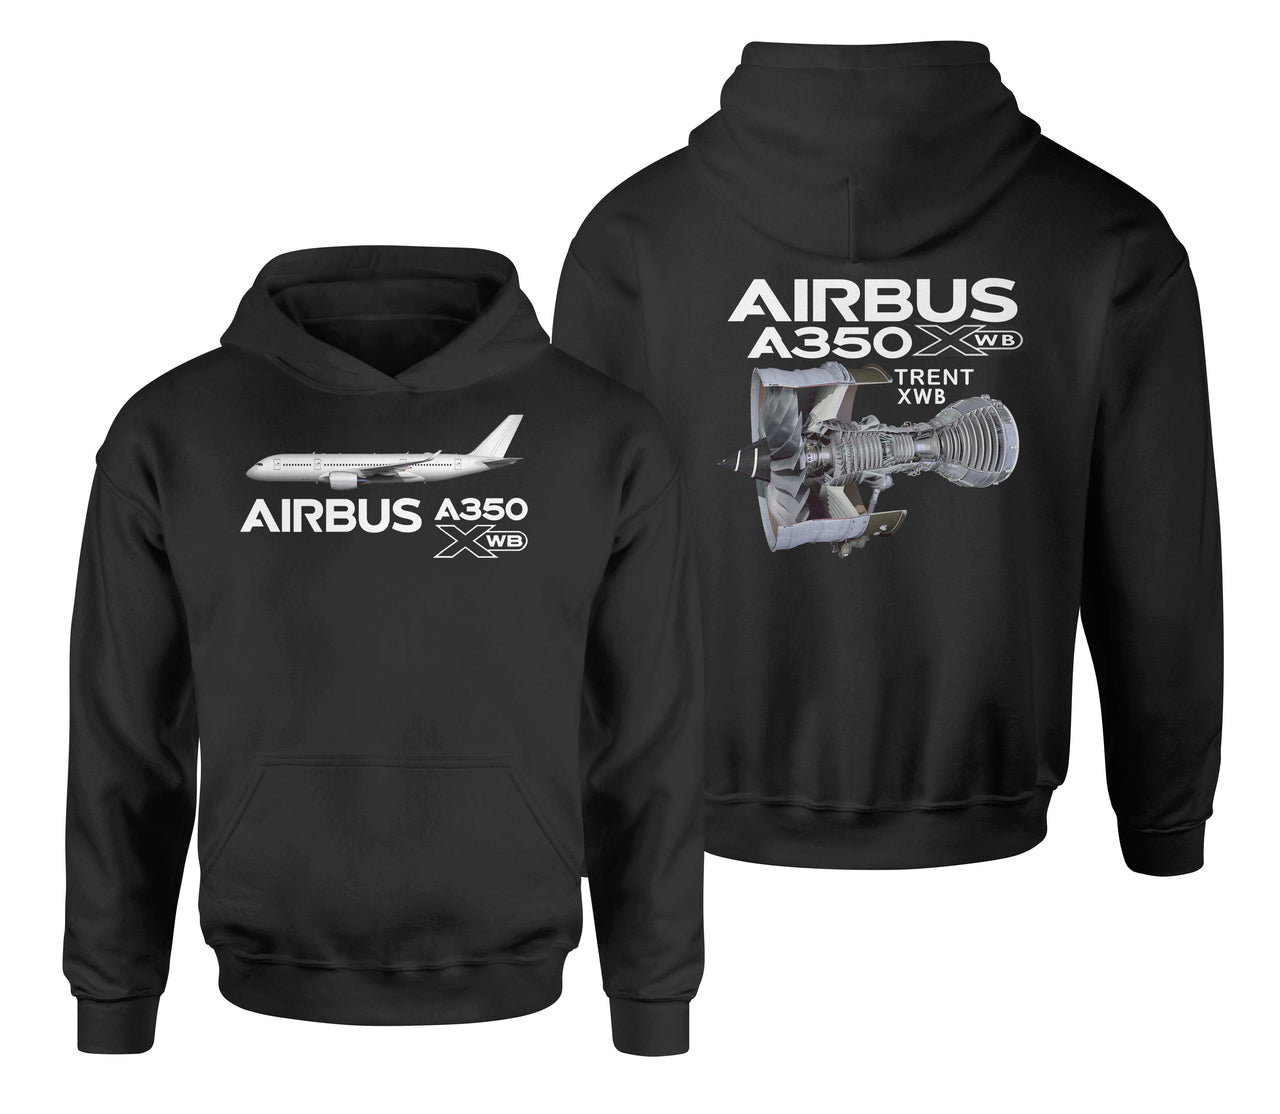 Airbus A350 & Trent XWB Engine Designed Double Side Hoodies